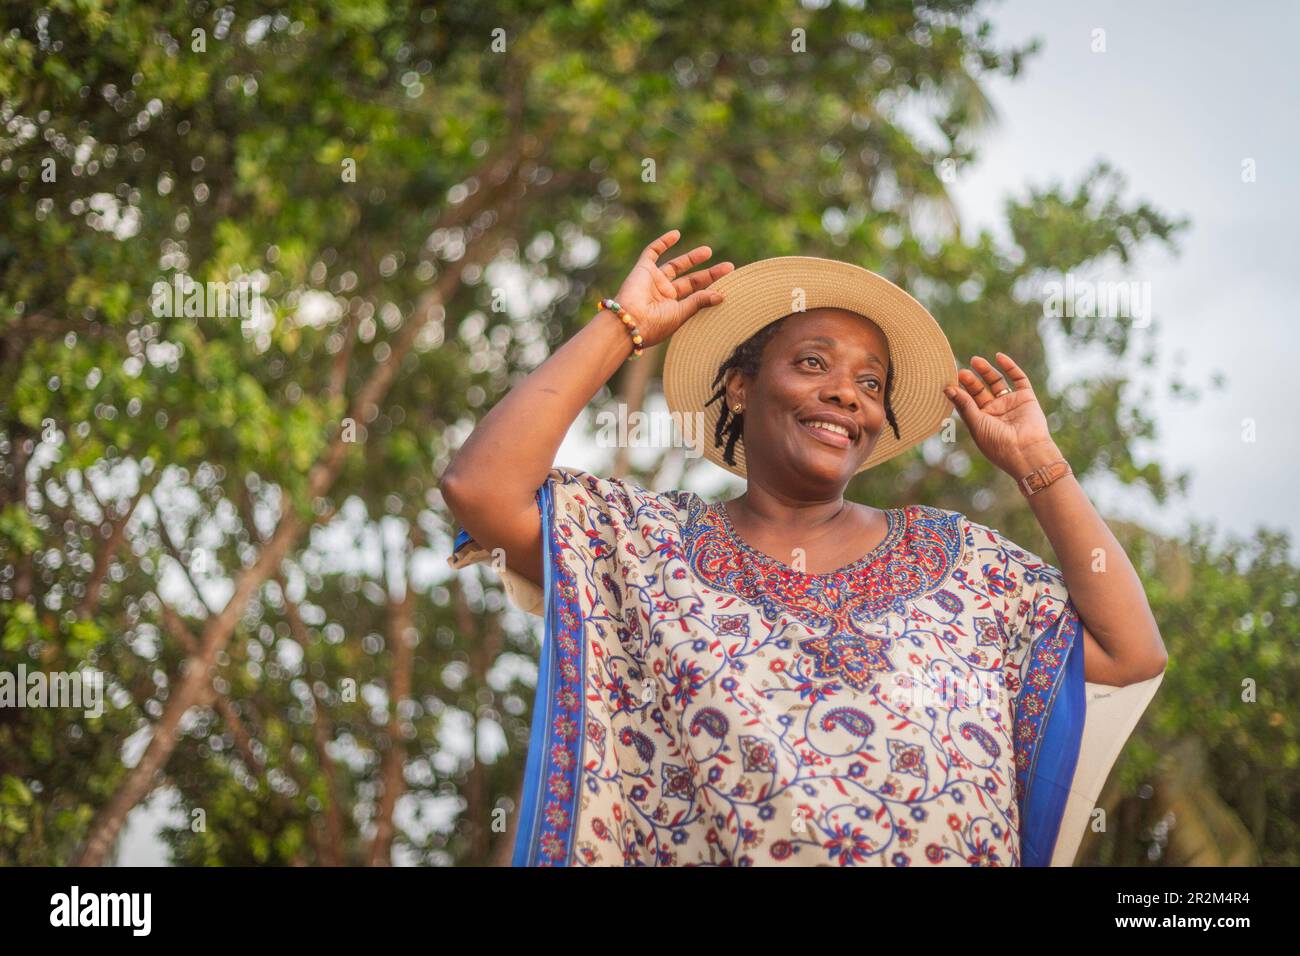 Happy African woman holding her summer hat and smiling while relaxing outdoors Stock Photo